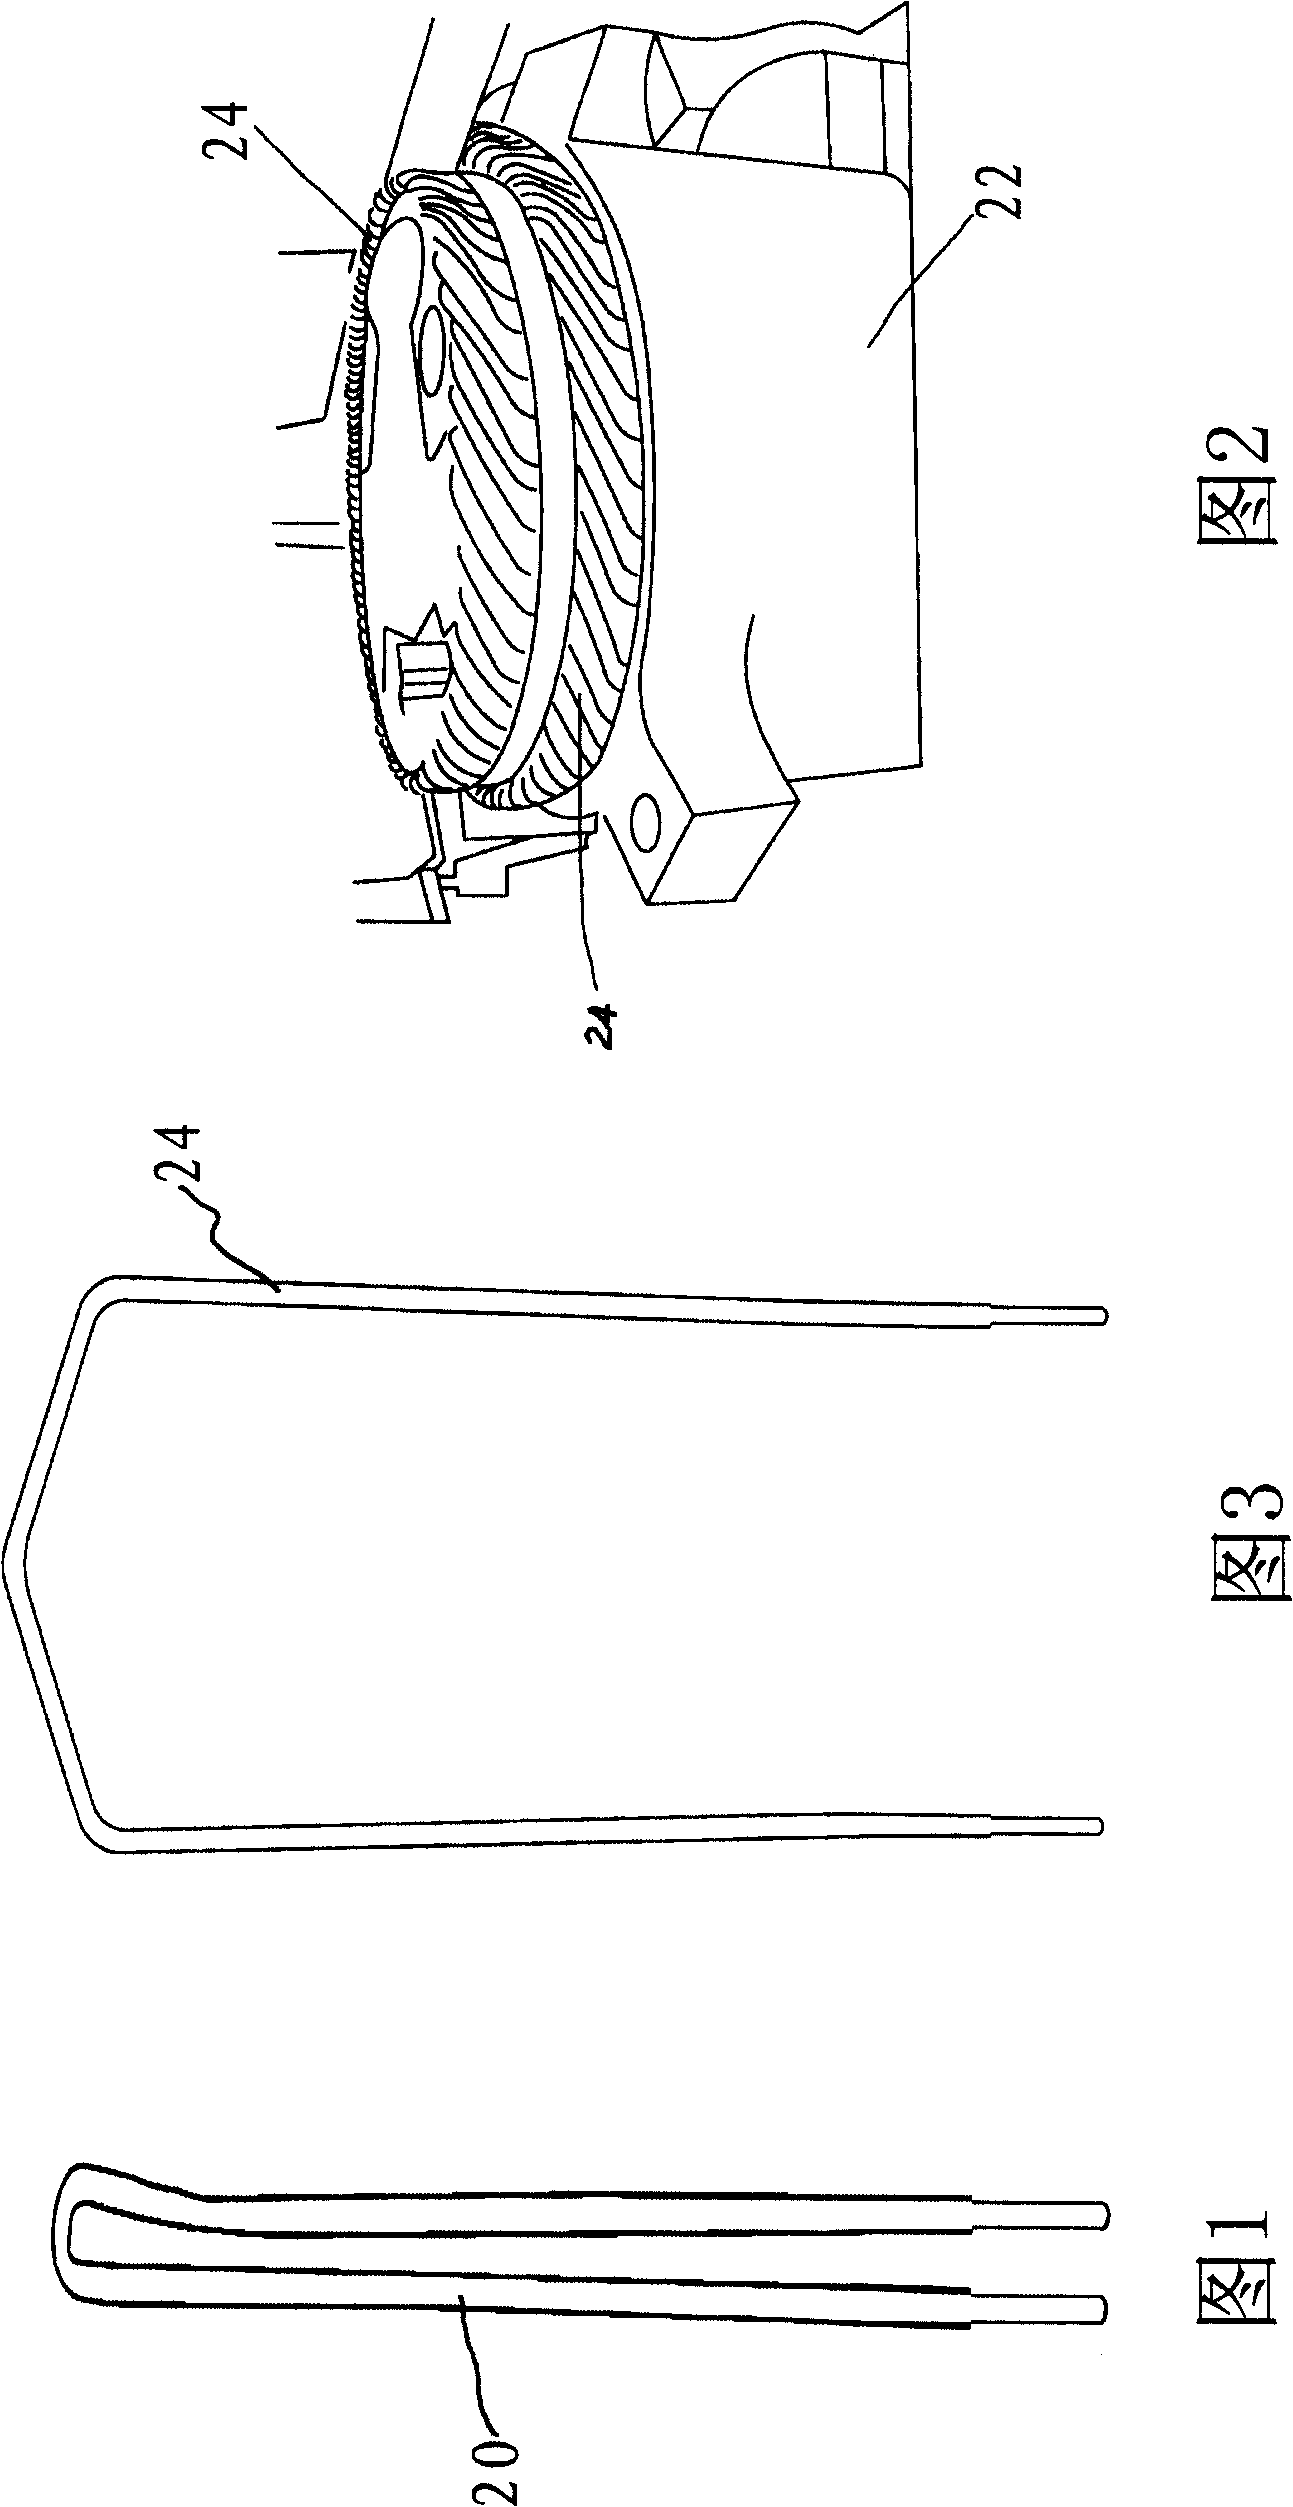 Method and device for removing leads from the twist machine and placing into stator and rotor groups